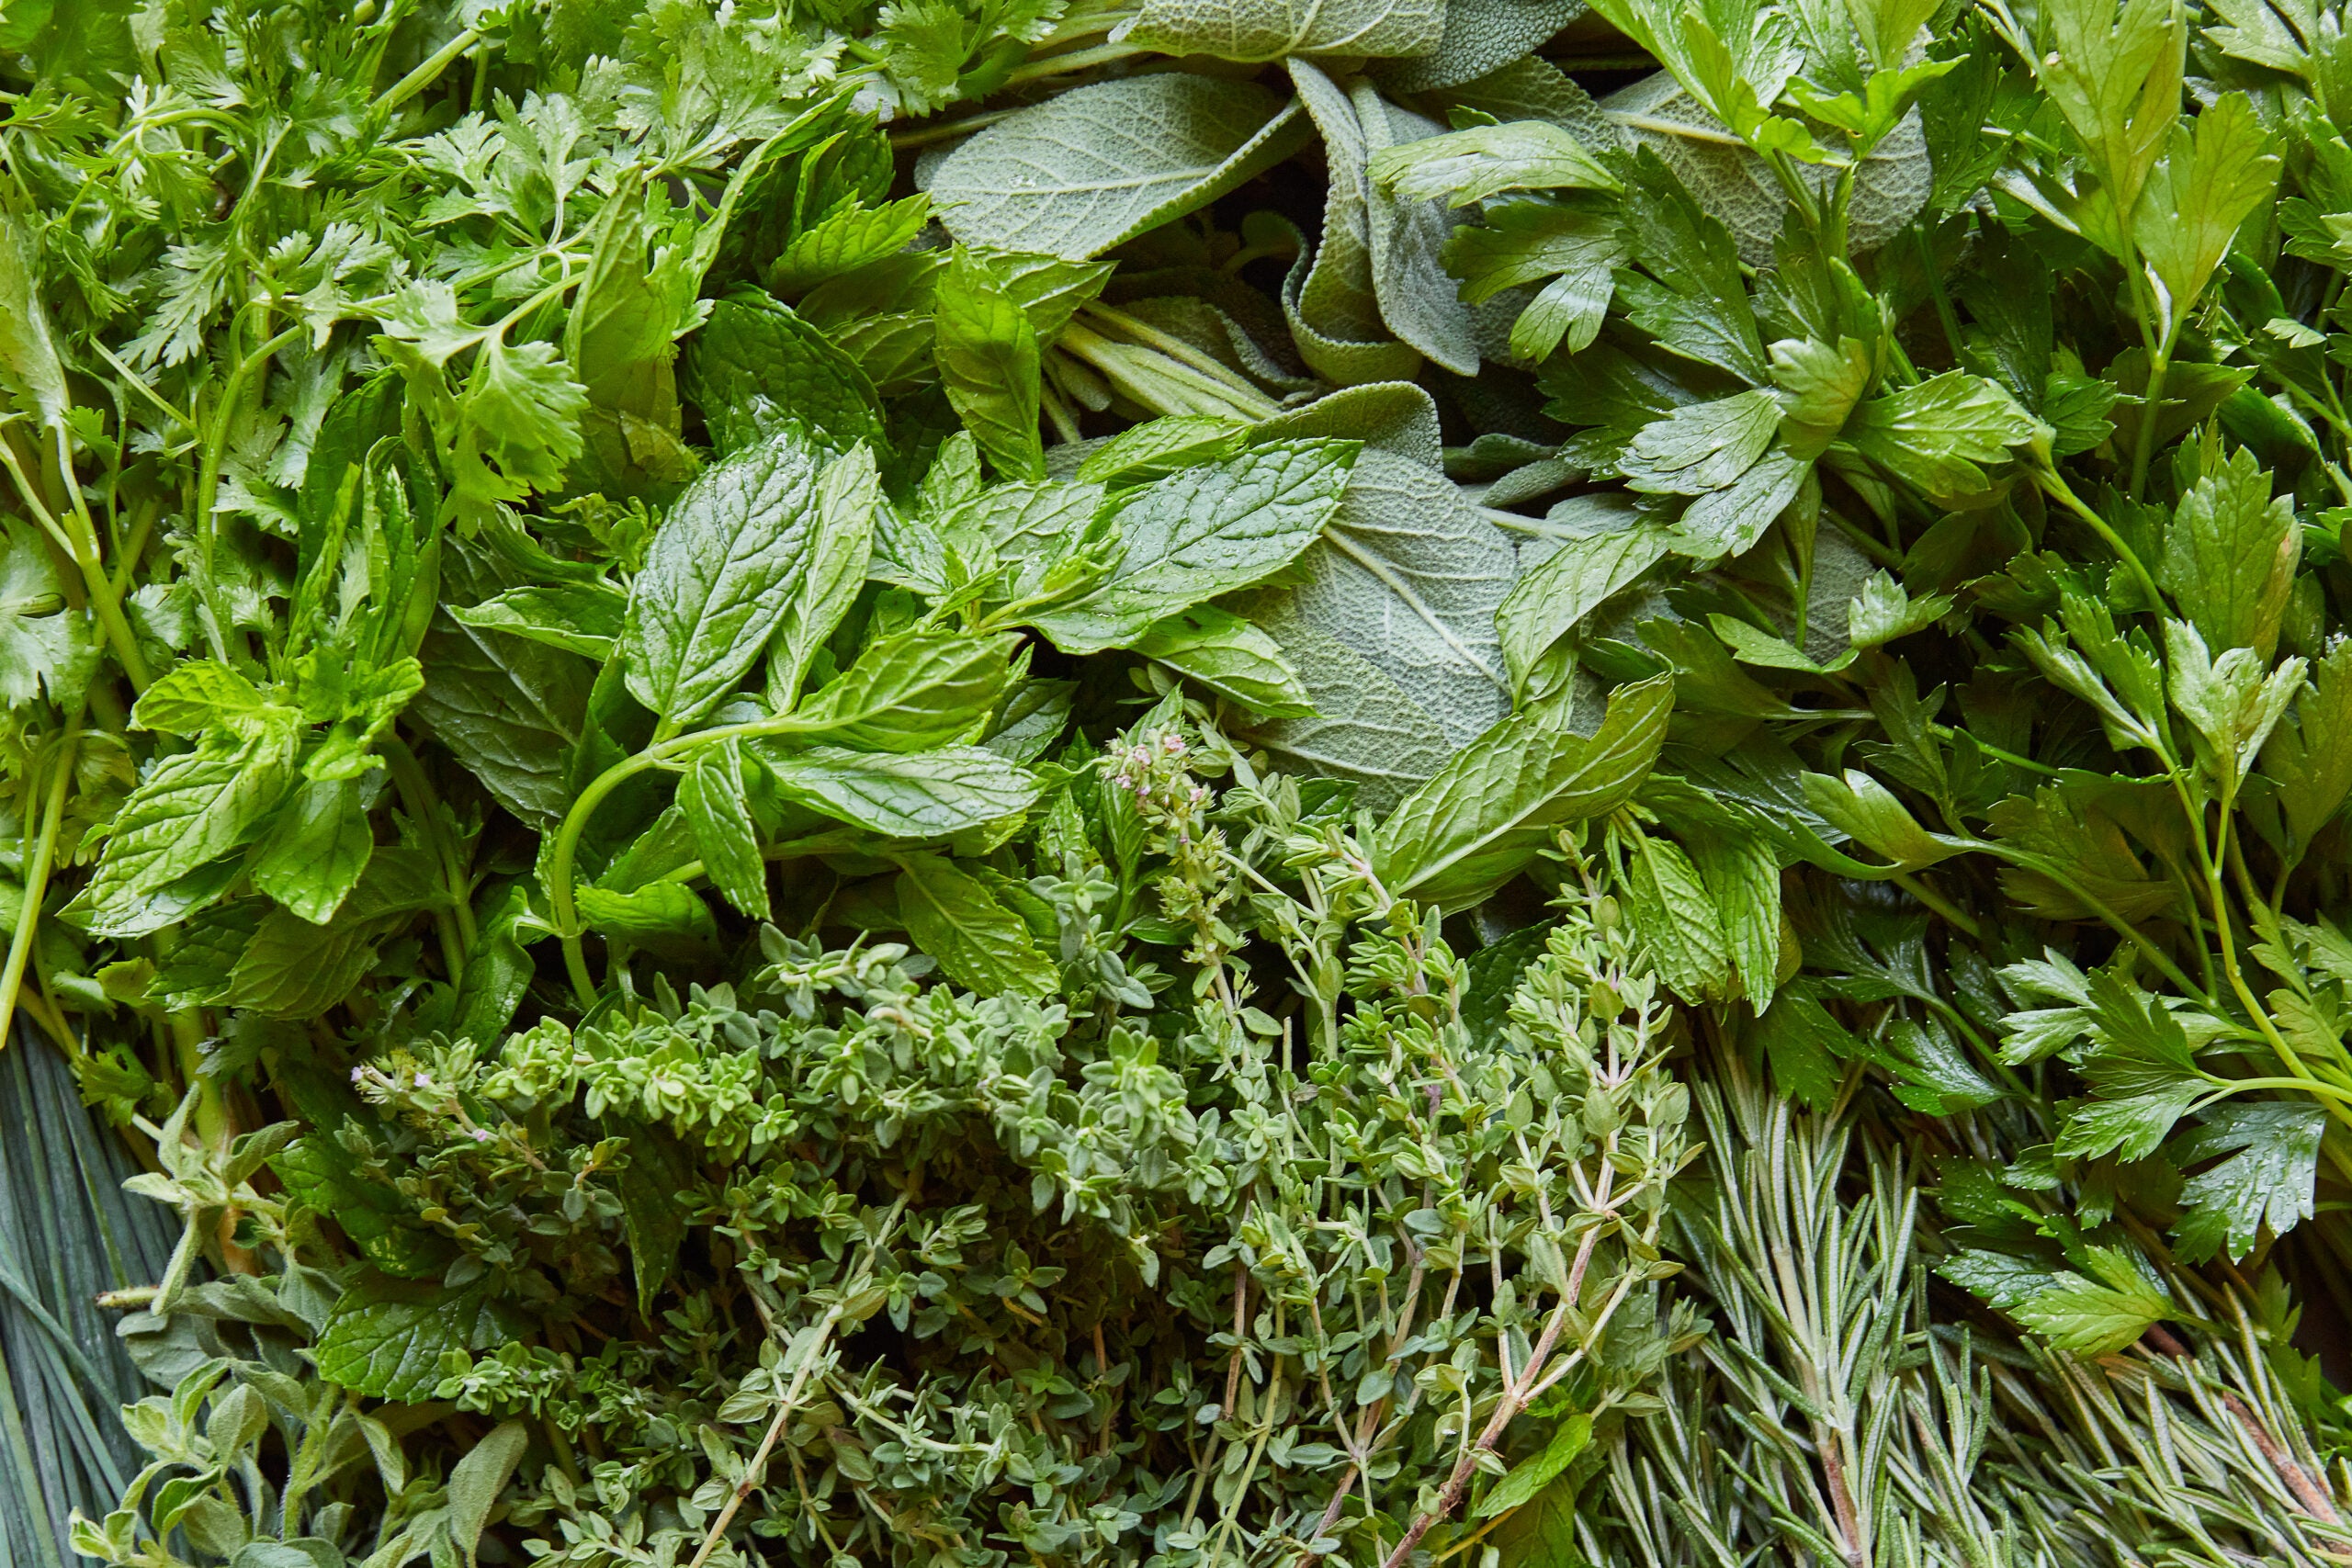 How to Store Fresh Mint (and Make Your Fresh Herbs Last Longer)